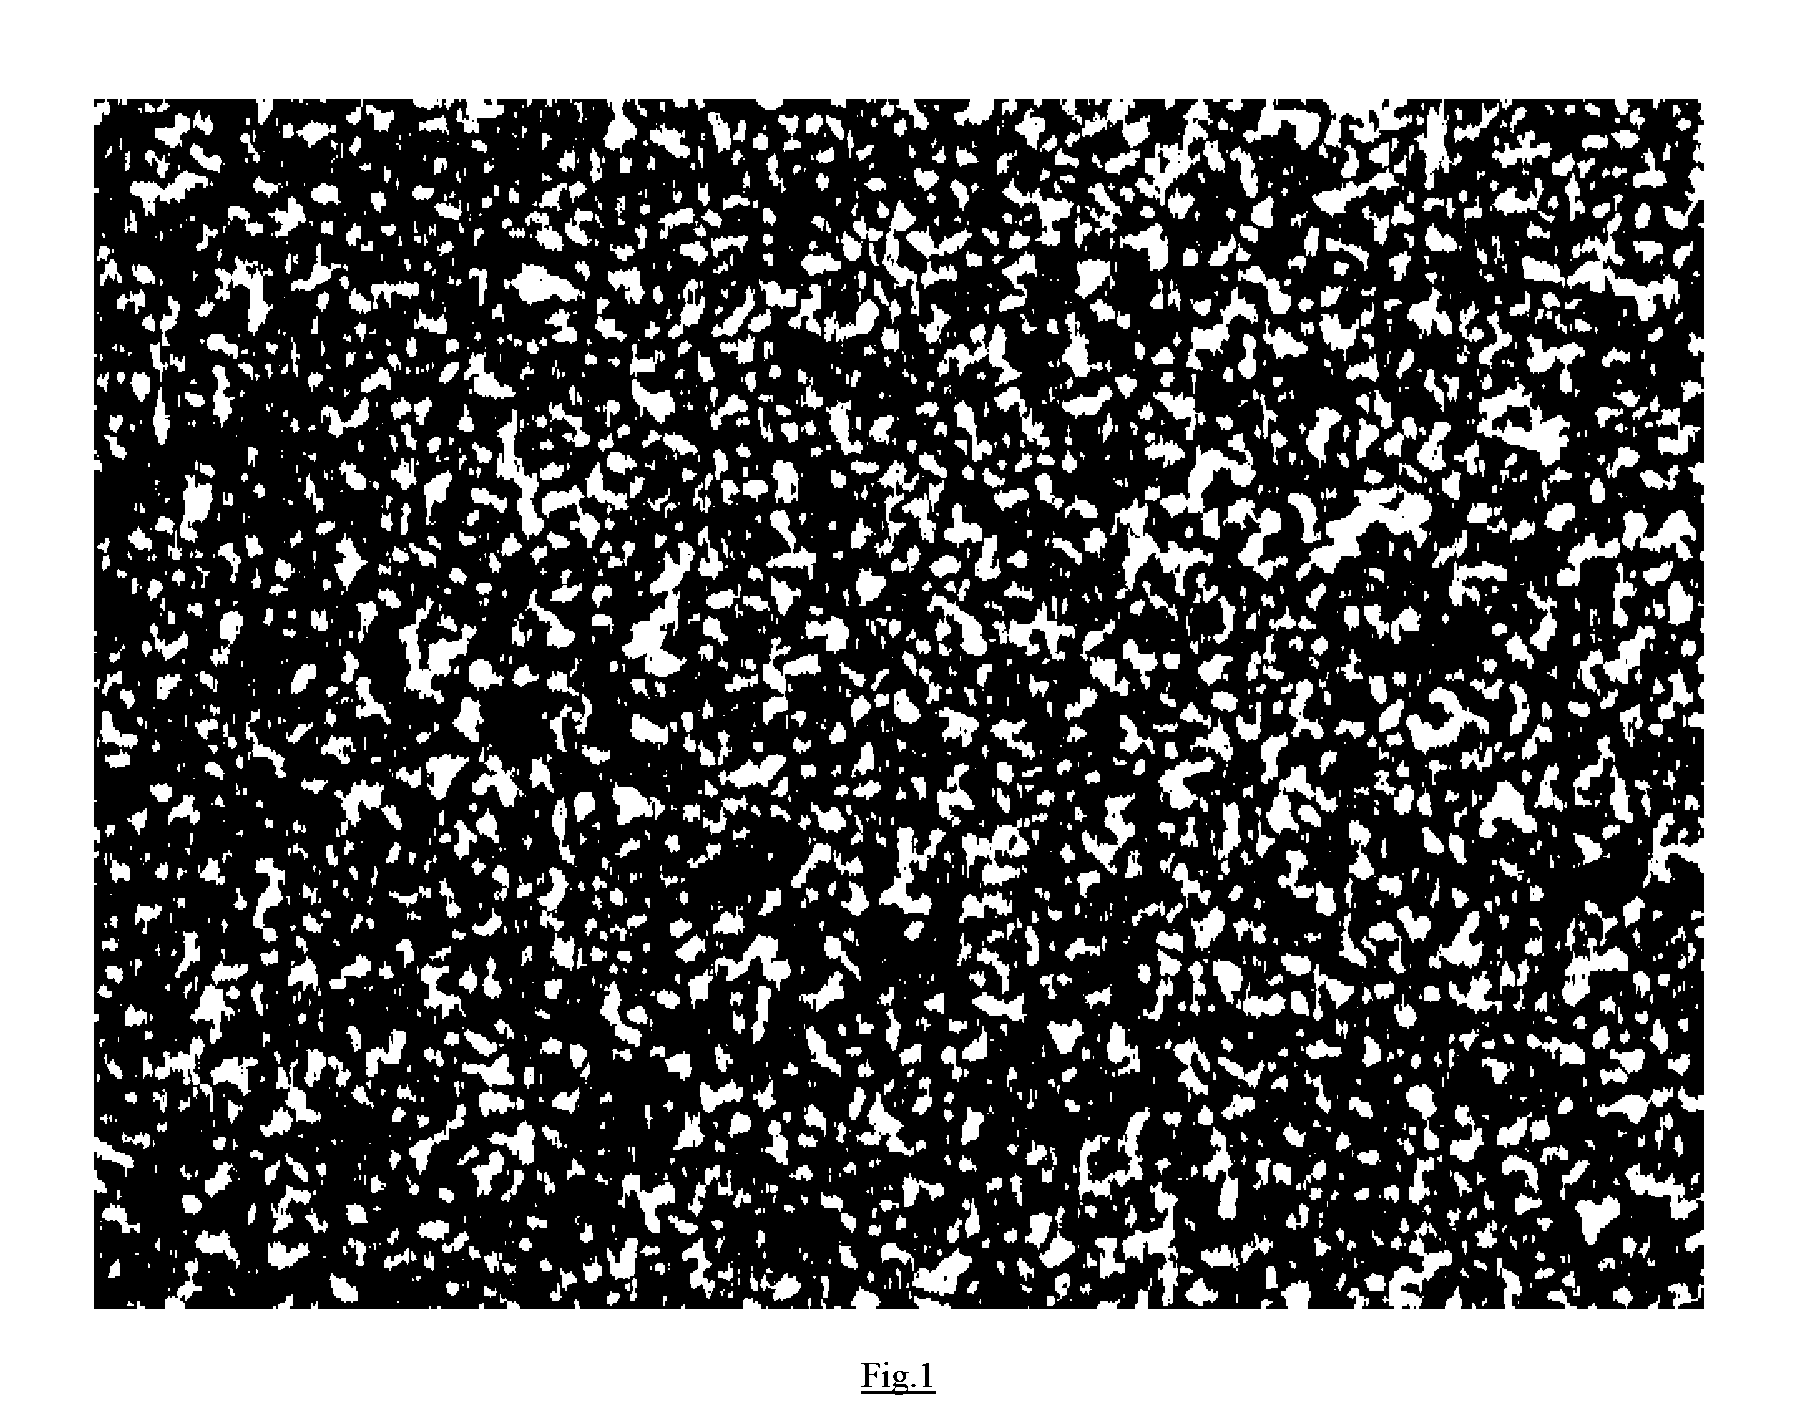 Speckle reduction